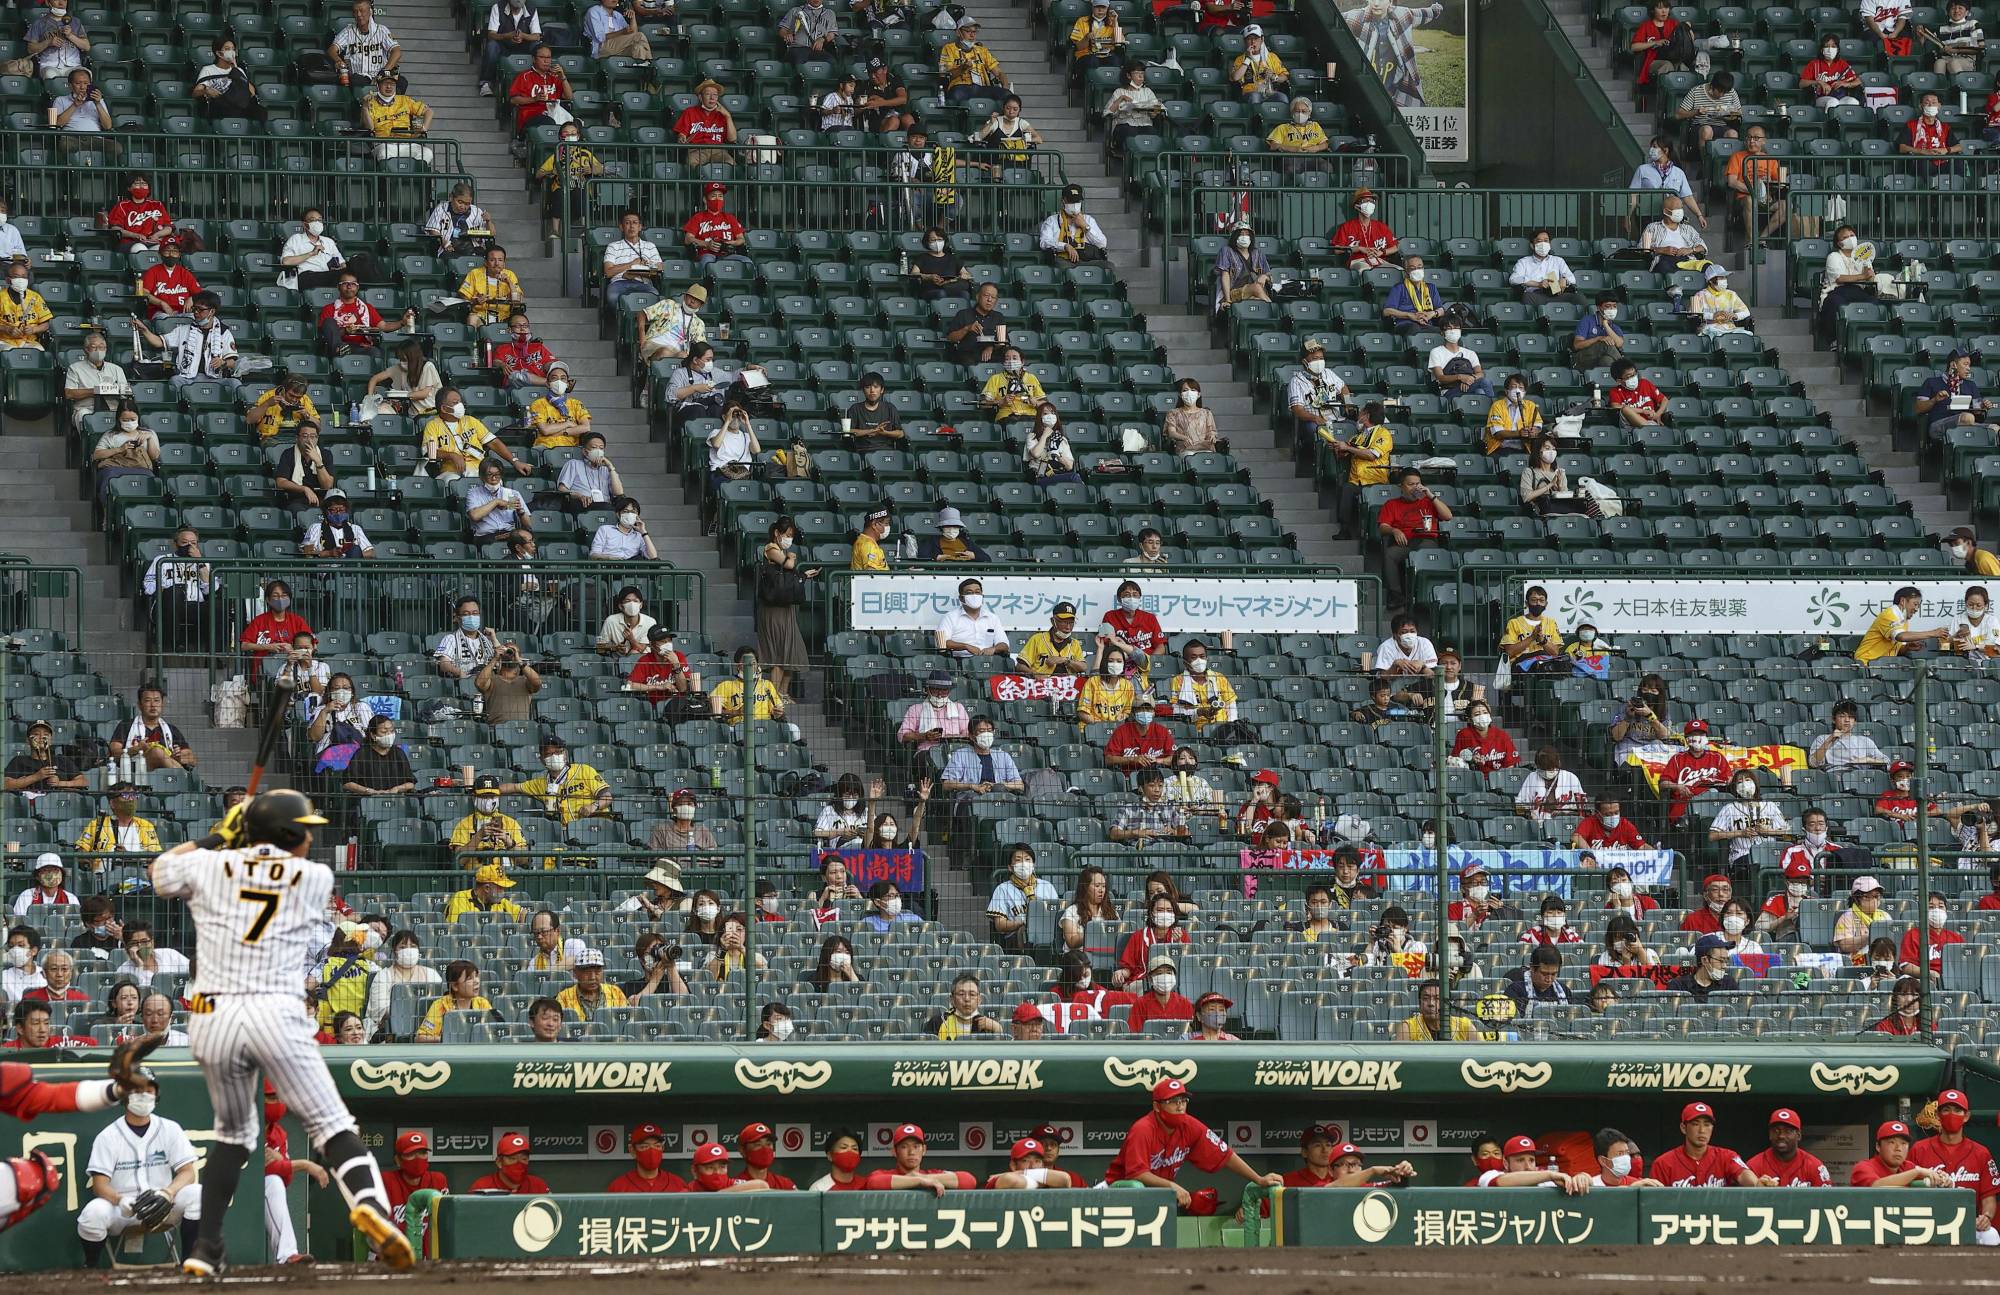 NPB to keep current restrictions on fan attendance in place through August 